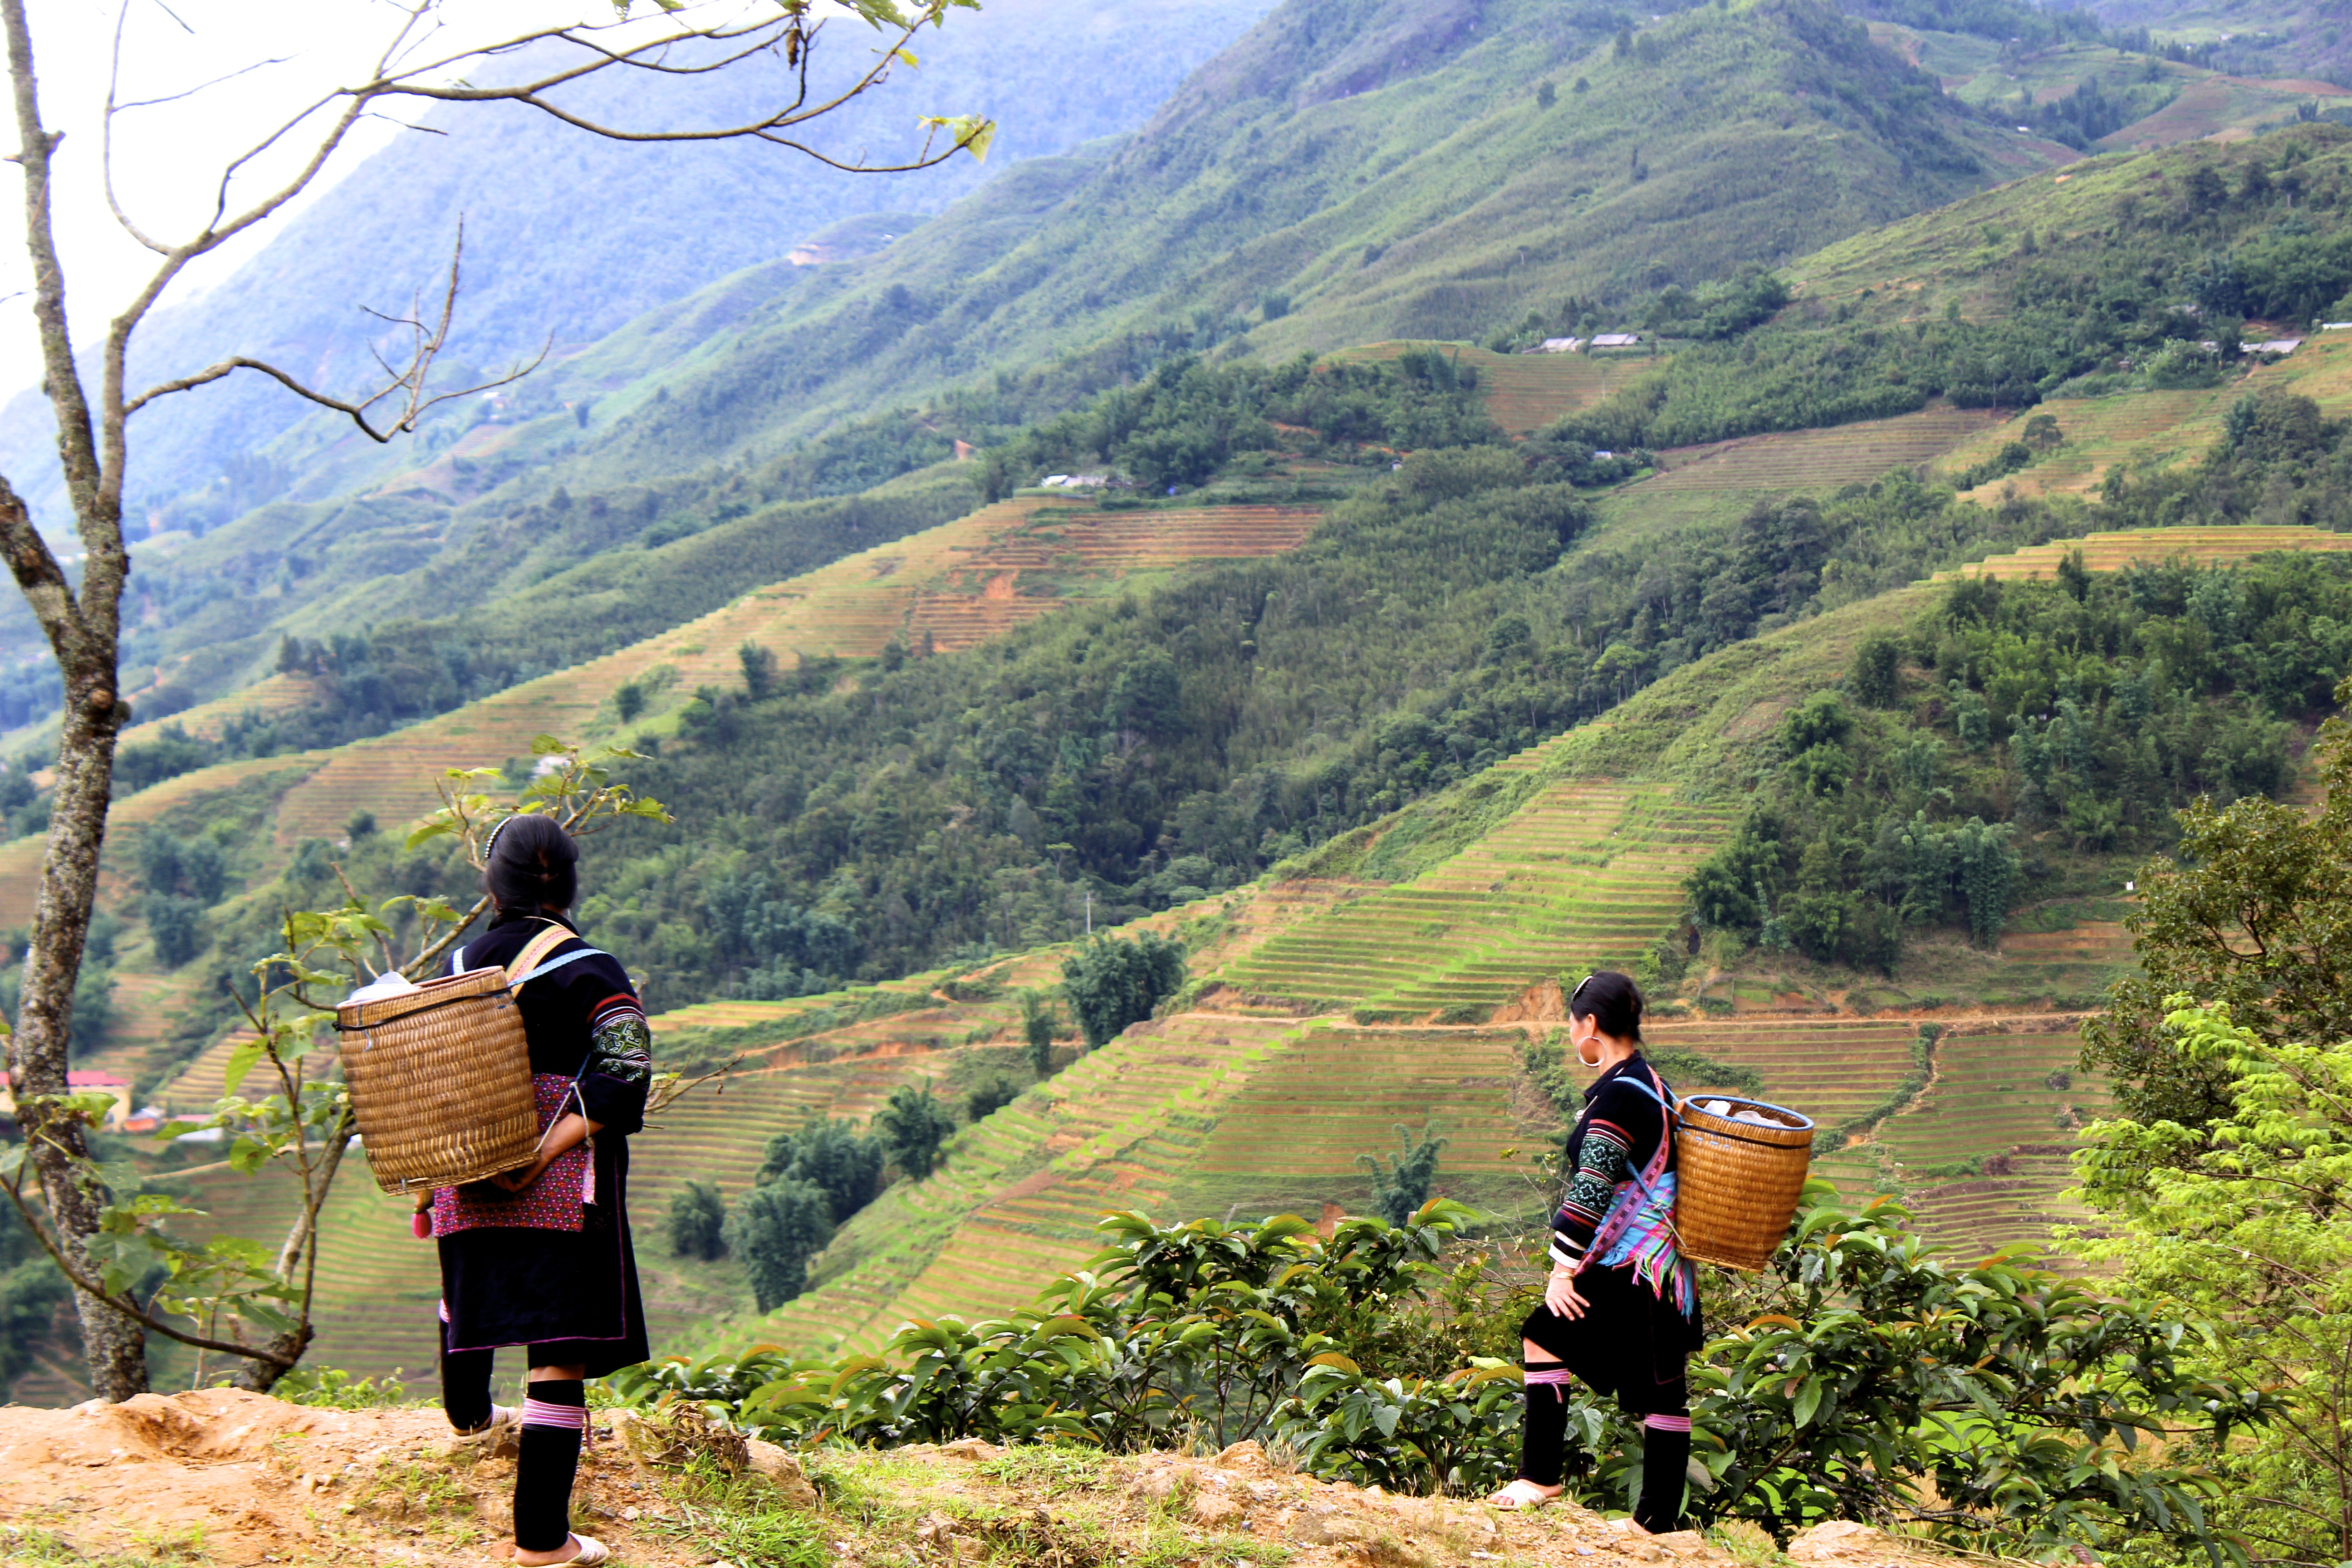 Women of the Hmong tribe look out over the beautiful landscape.